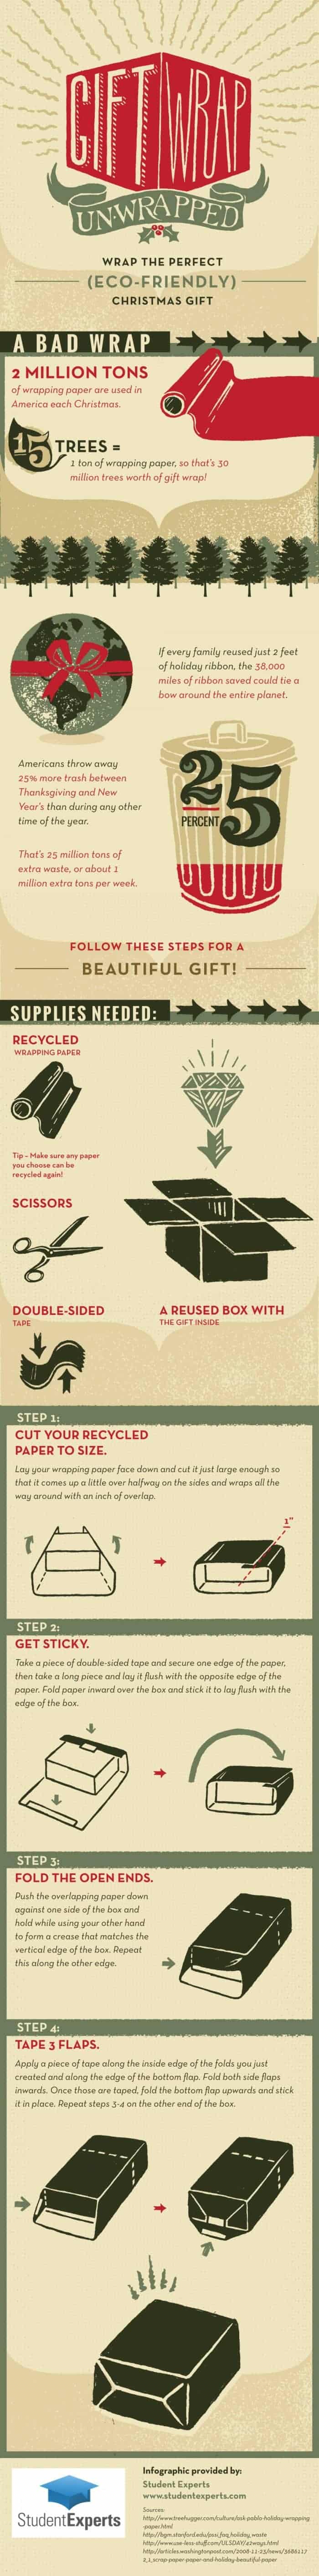 Gift Wrap Unwrapped Infographic